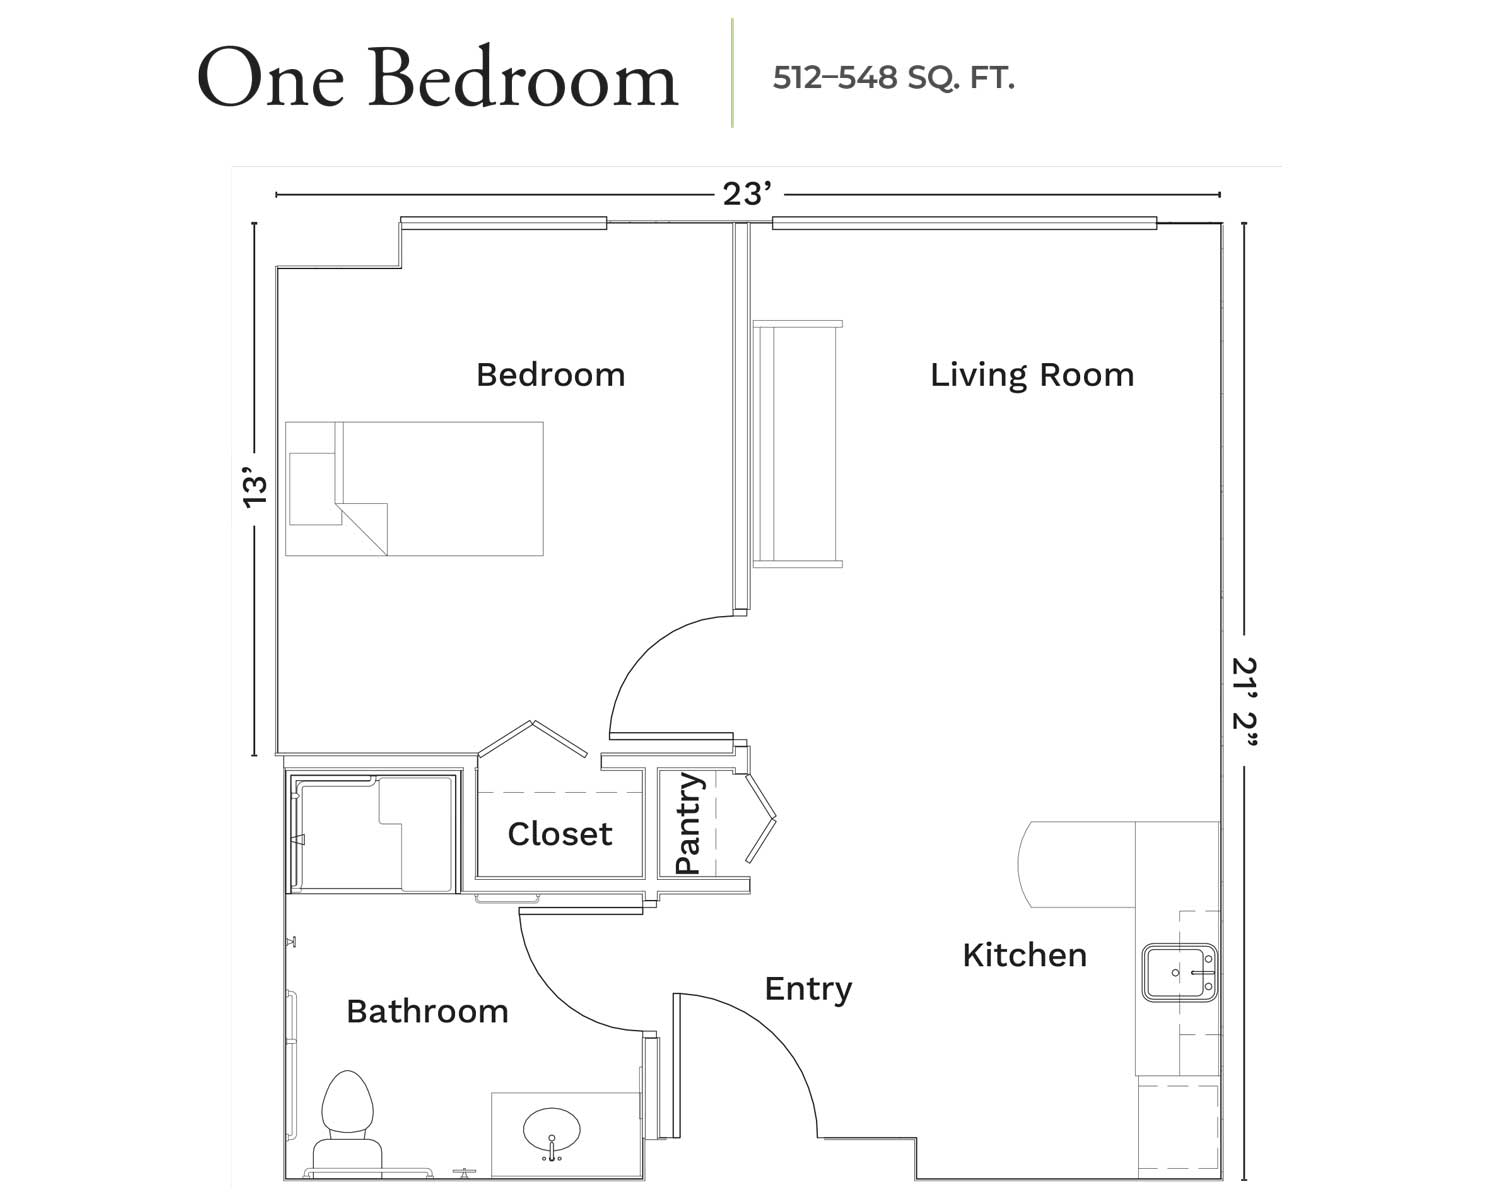 One-bedroom apartment floor plan with dimensions, showing bedroom, living room, kitchen, and bathroom.